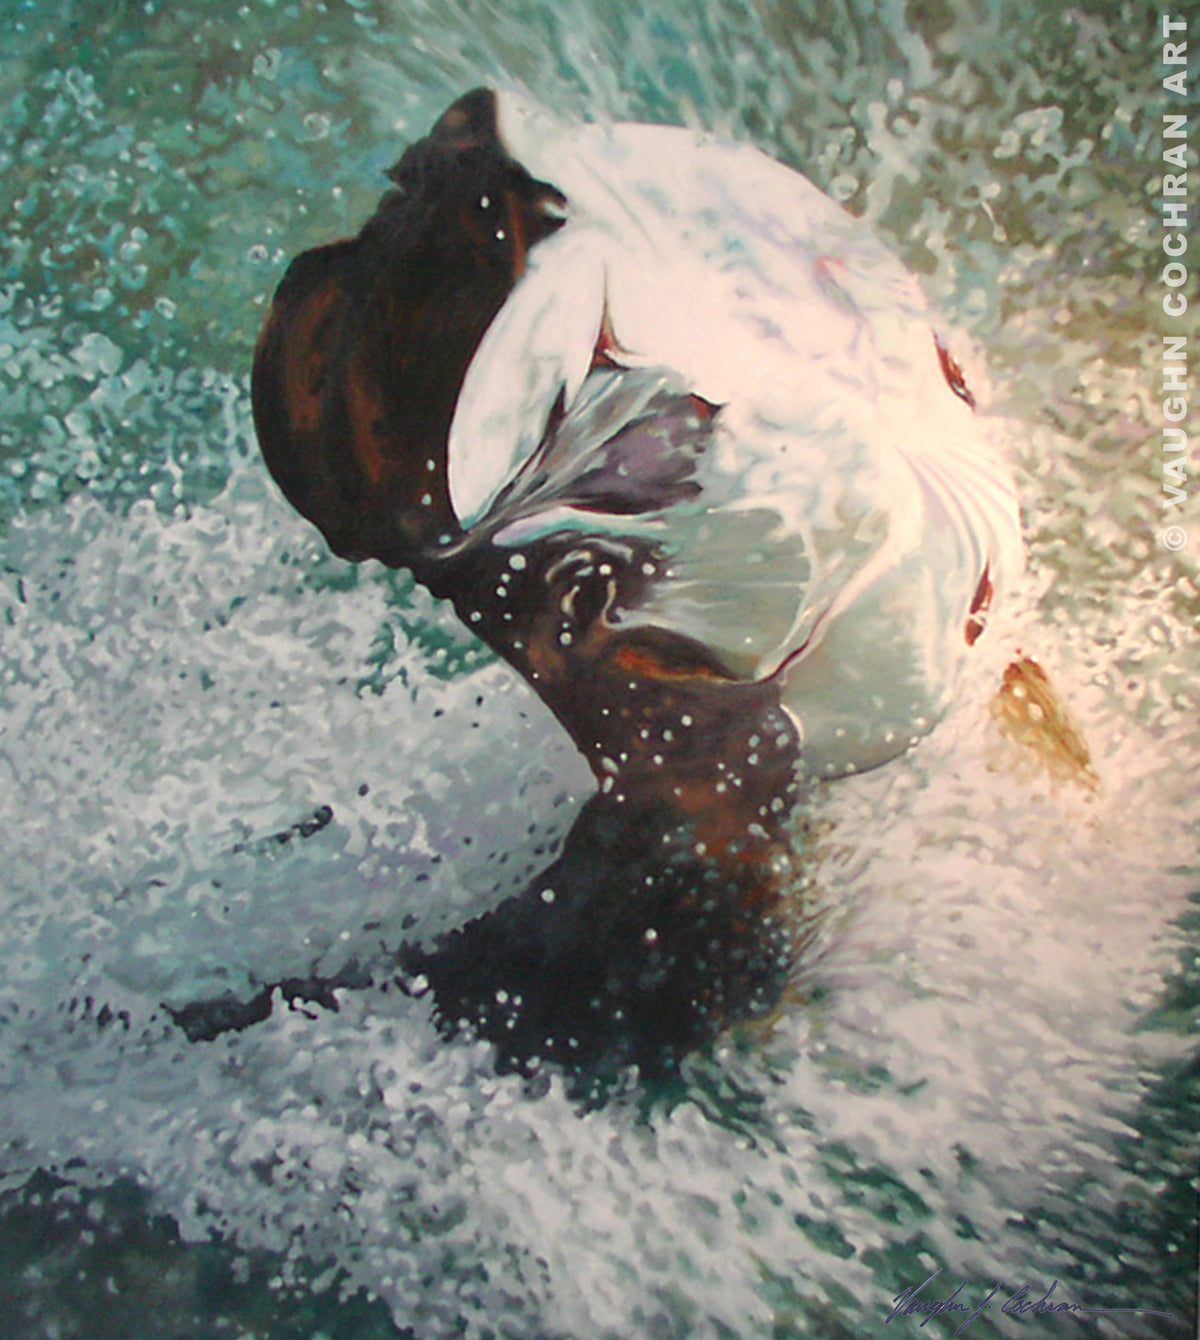 Tarpon at the Boat Ltd Edition Giclee on Paper